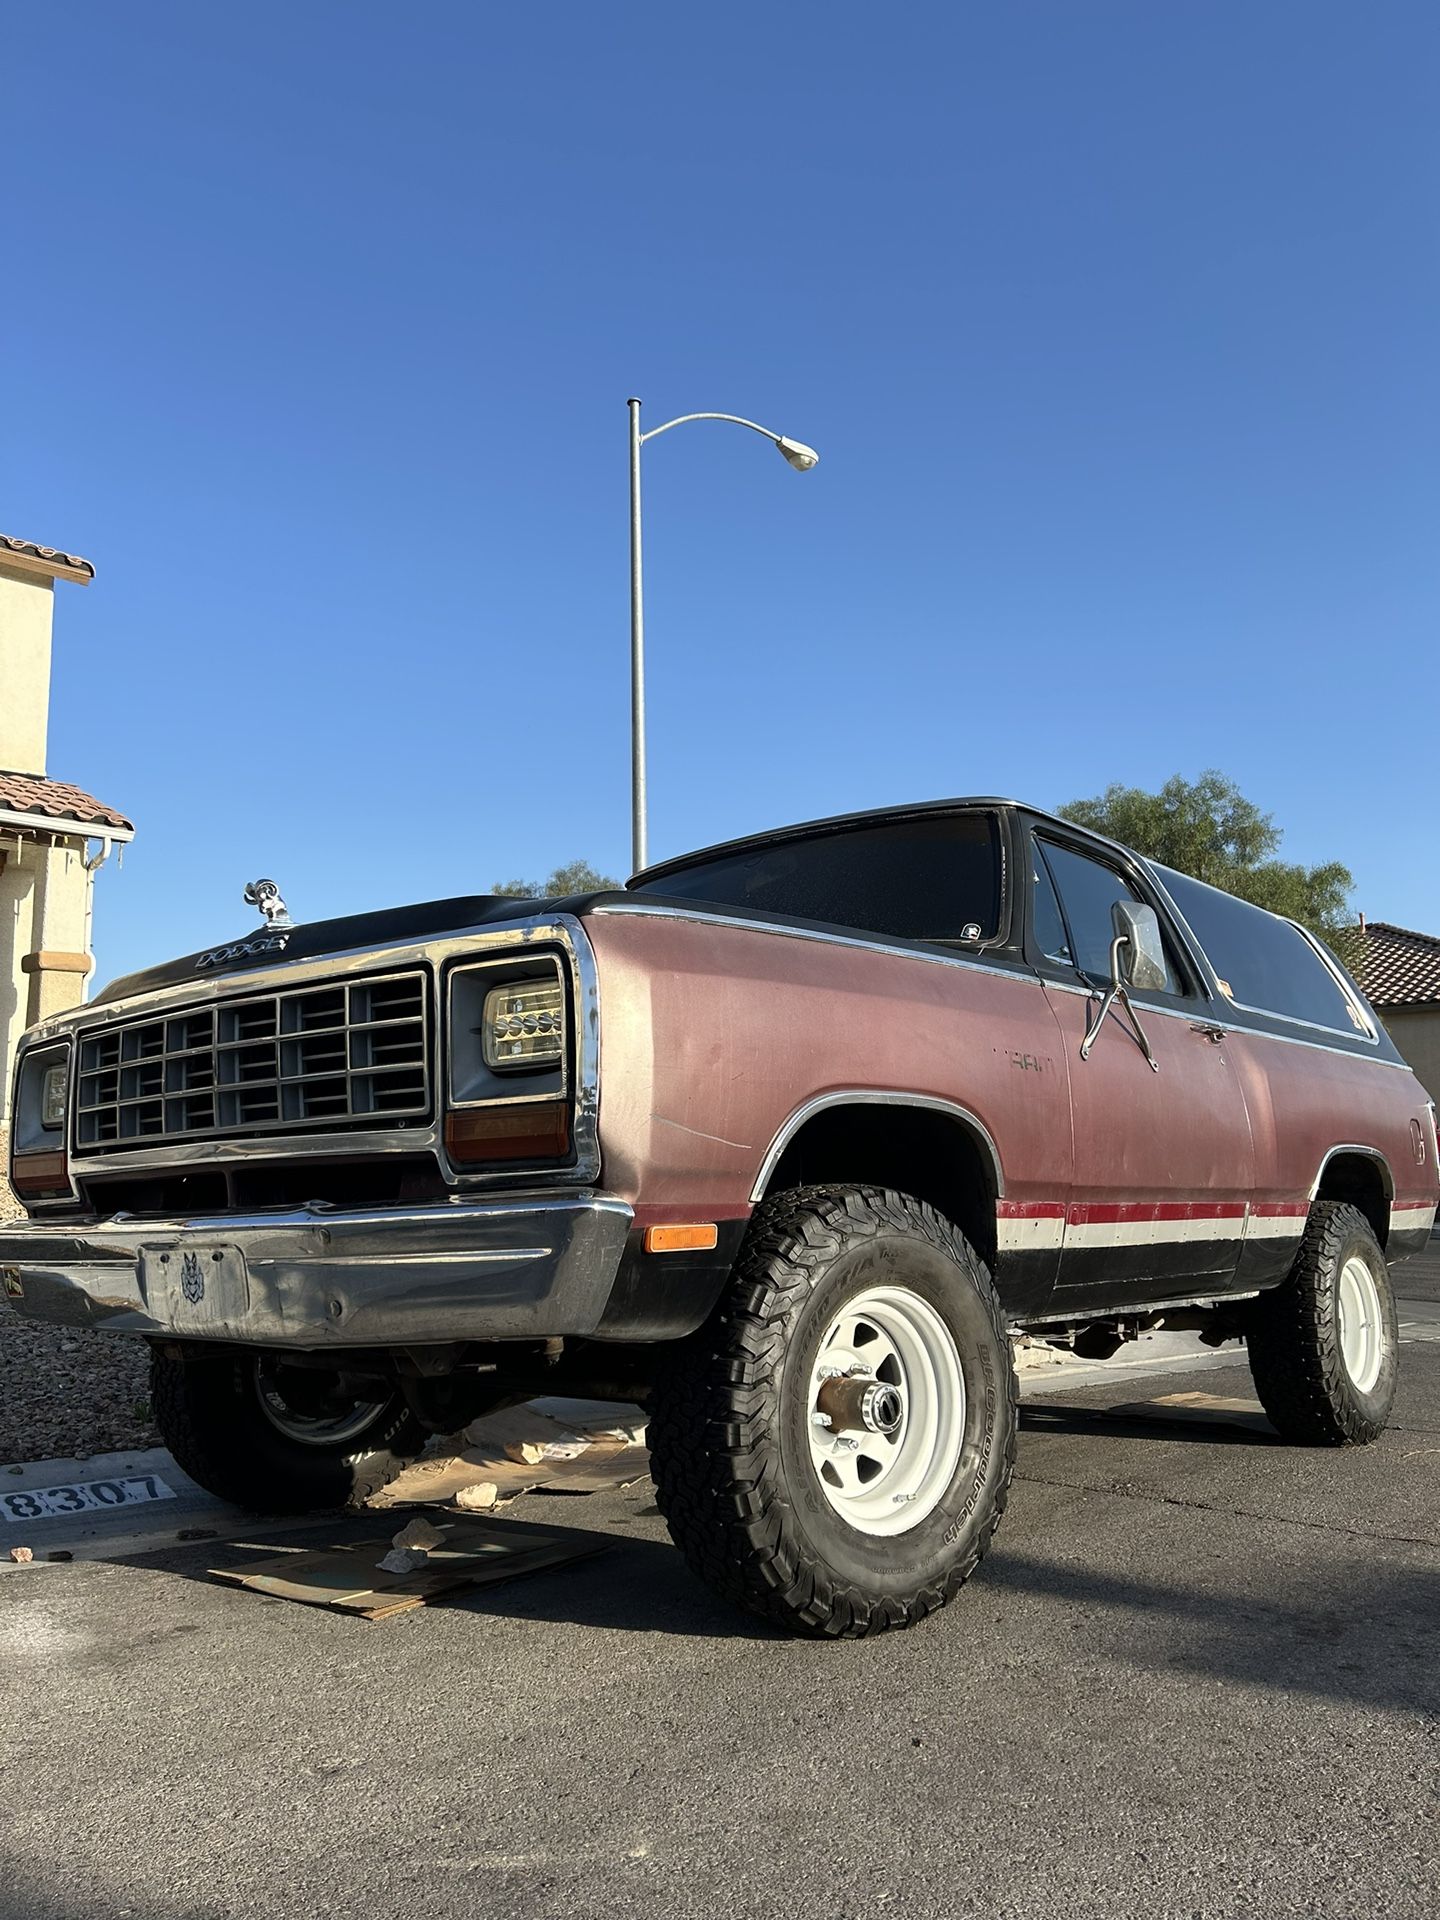 1983 Dodge Ram Charger